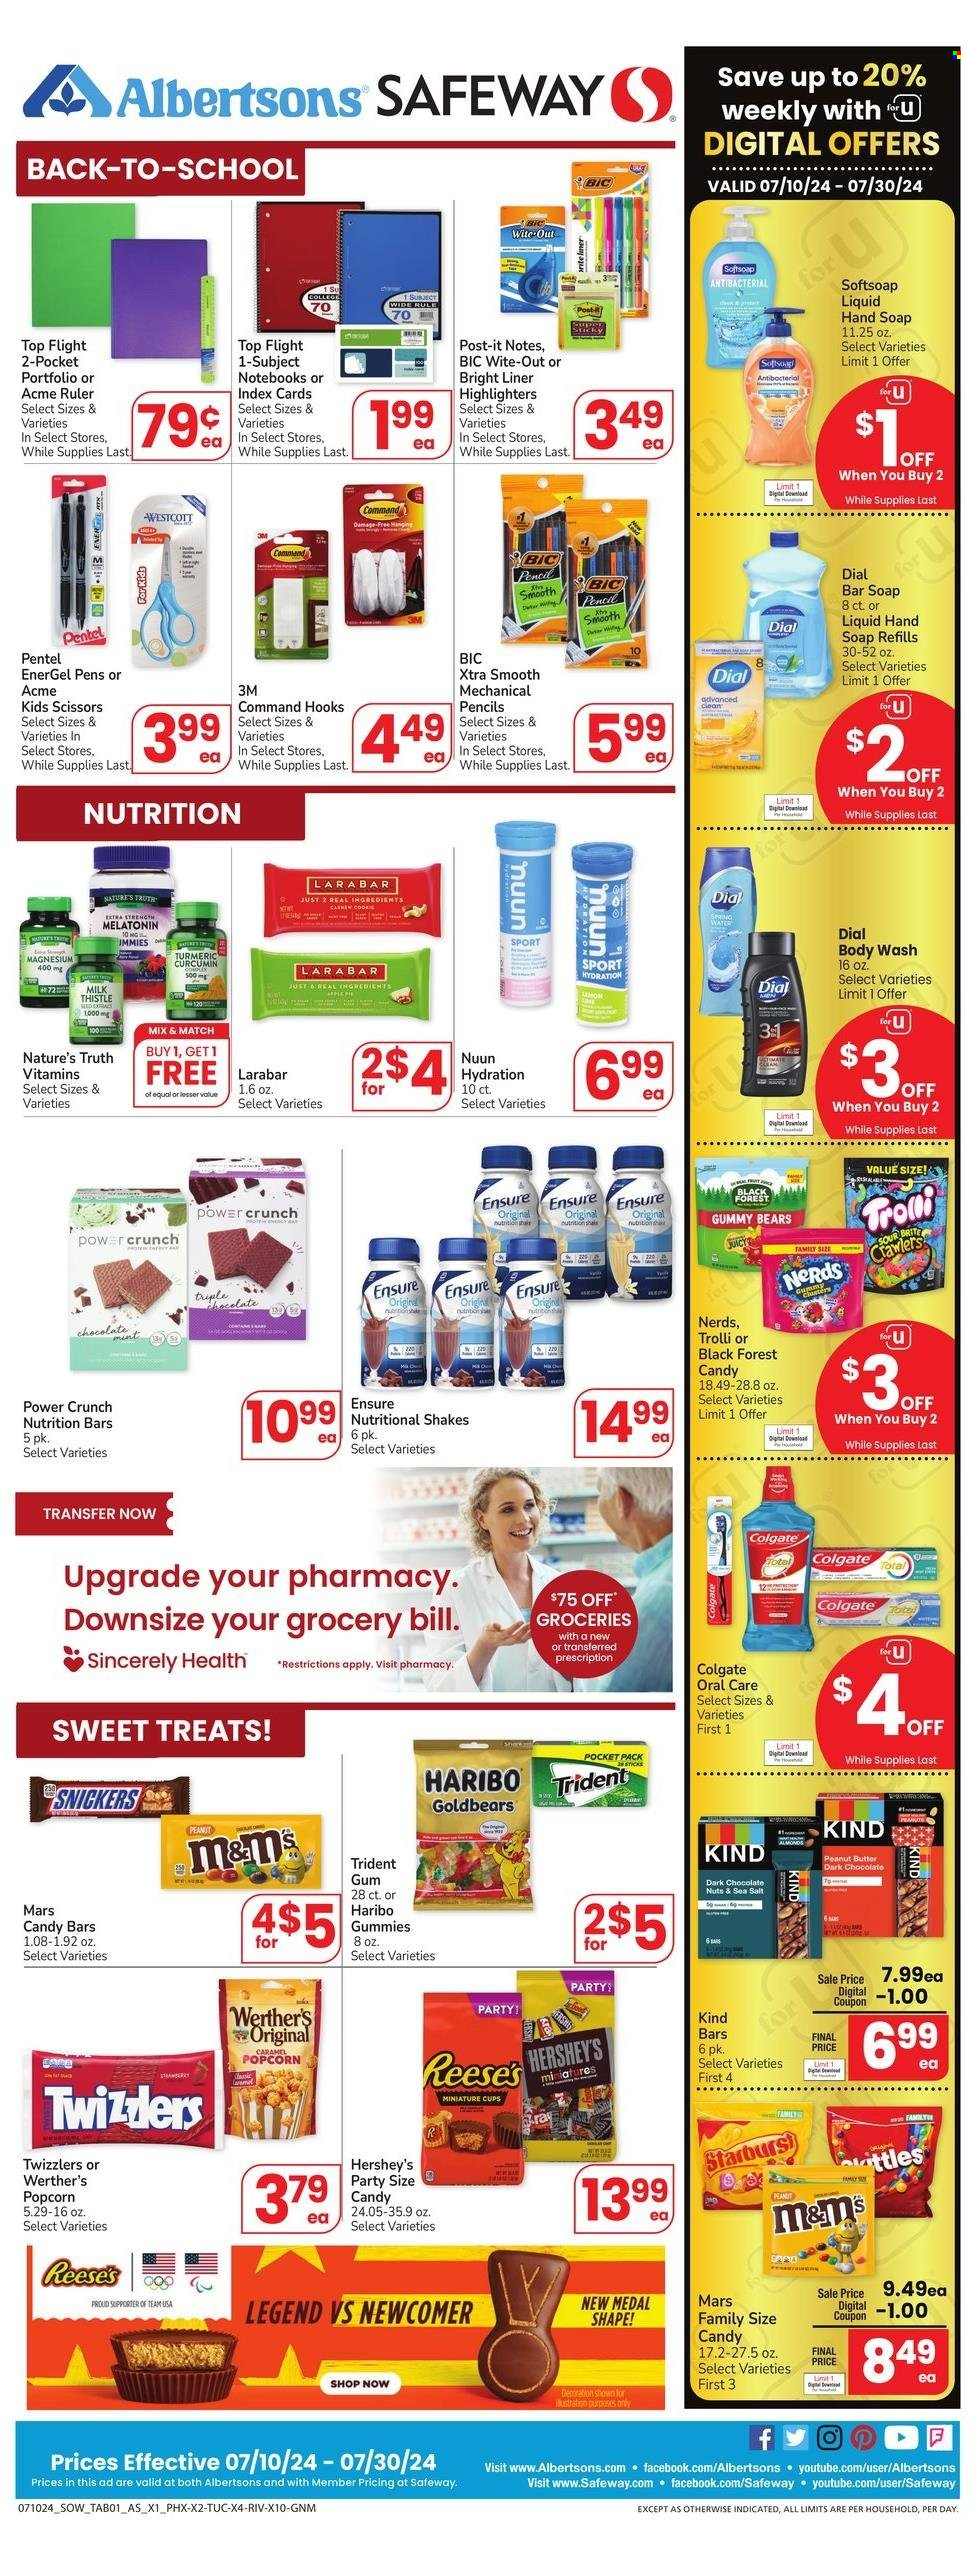 thumbnail - Safeway Flyer - 07/24/2024 - 07/30/2024 - Sales products - snack bar, shake, probiotic drink, Reese's, Hershey's, Trolli, Haribo, Snickers, Mars, M&M's, crackers, chewing gum, jelly candy, dark chocolate, Trident, Starburst, candy bar, Werther's Original, sweets, lollies, gummies, popcorn, Tuc, nutrition bar, nut bar, turmeric, caramel, peanut butter, XTRA, body wash, Softsoap, soap bar, Dial, hand wash refill, Colgate, hook, pen, scissors, pencil, ruler, sticky memos, Post-It, highlighters, spiral notebook, index cards, magnesium, Melatonin, Nature's Truth, nutritional supplement, dietary supplement, vitamins. Page 6.